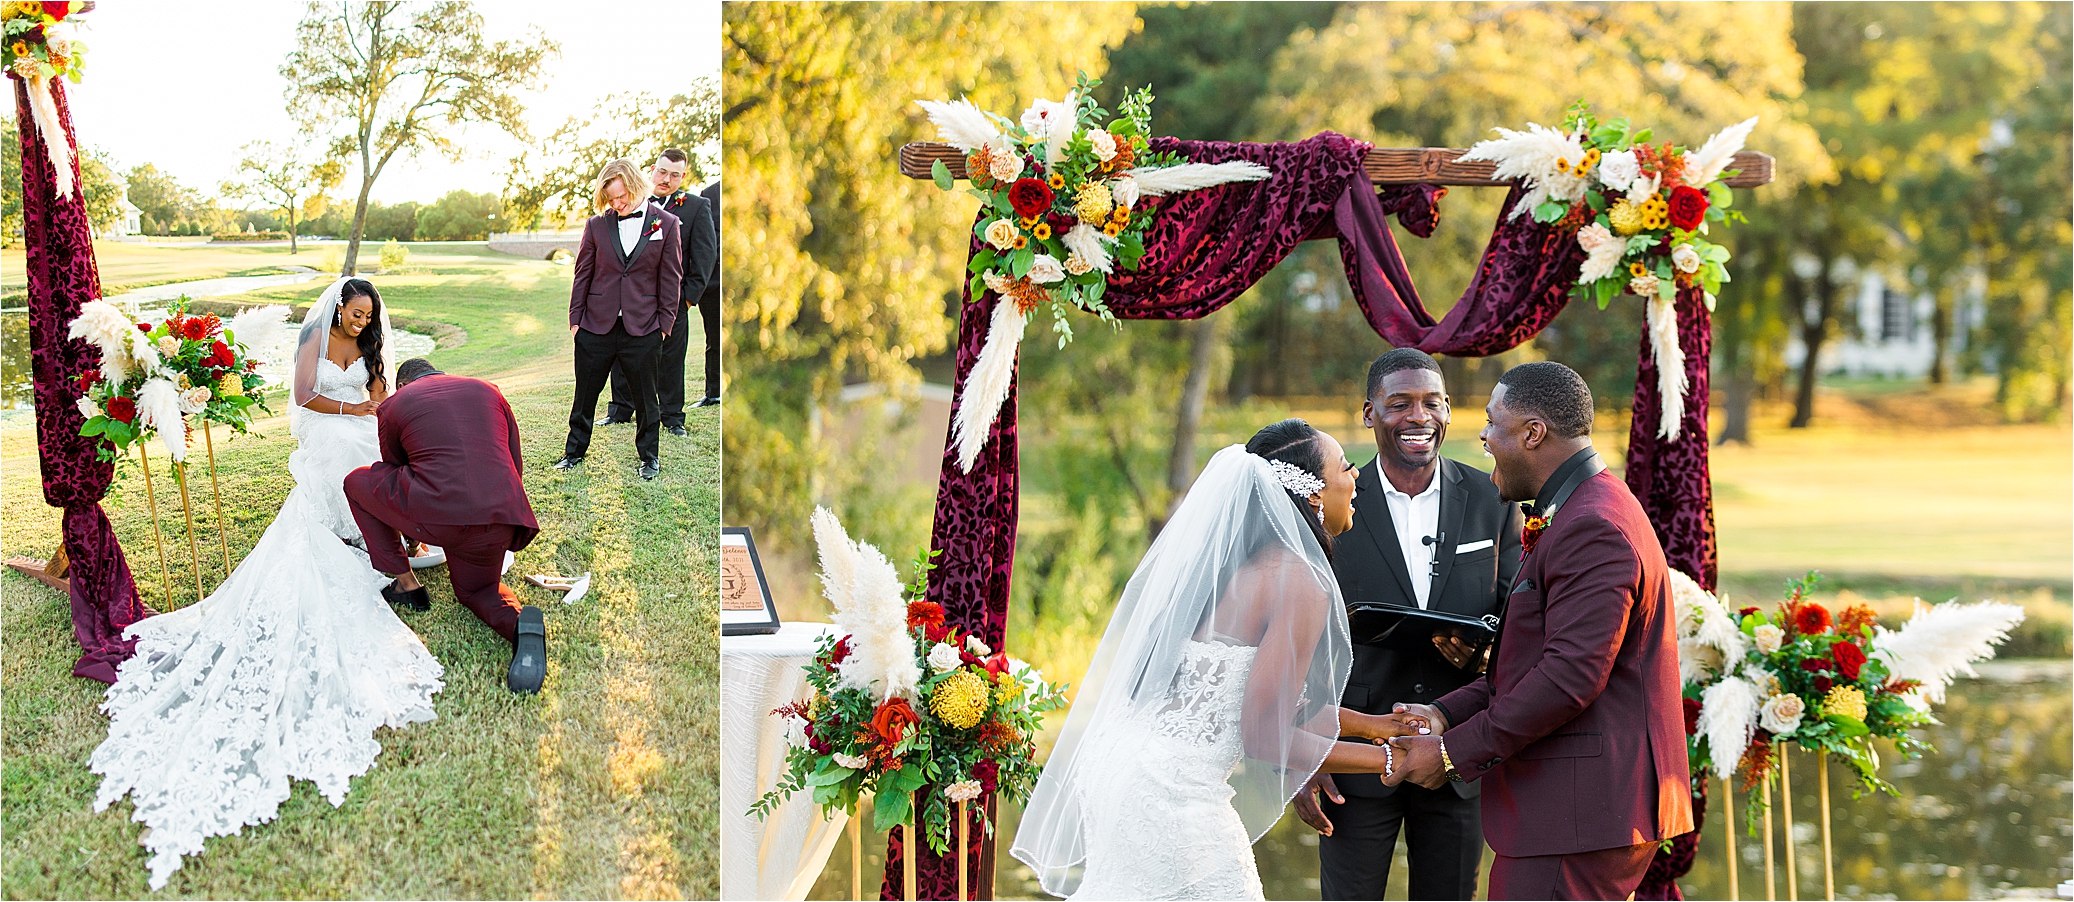 A bride and groom laugh as they exchange vows for their outdoor ceremony at The Morgan Creek Barn in Aubrey, Texas 